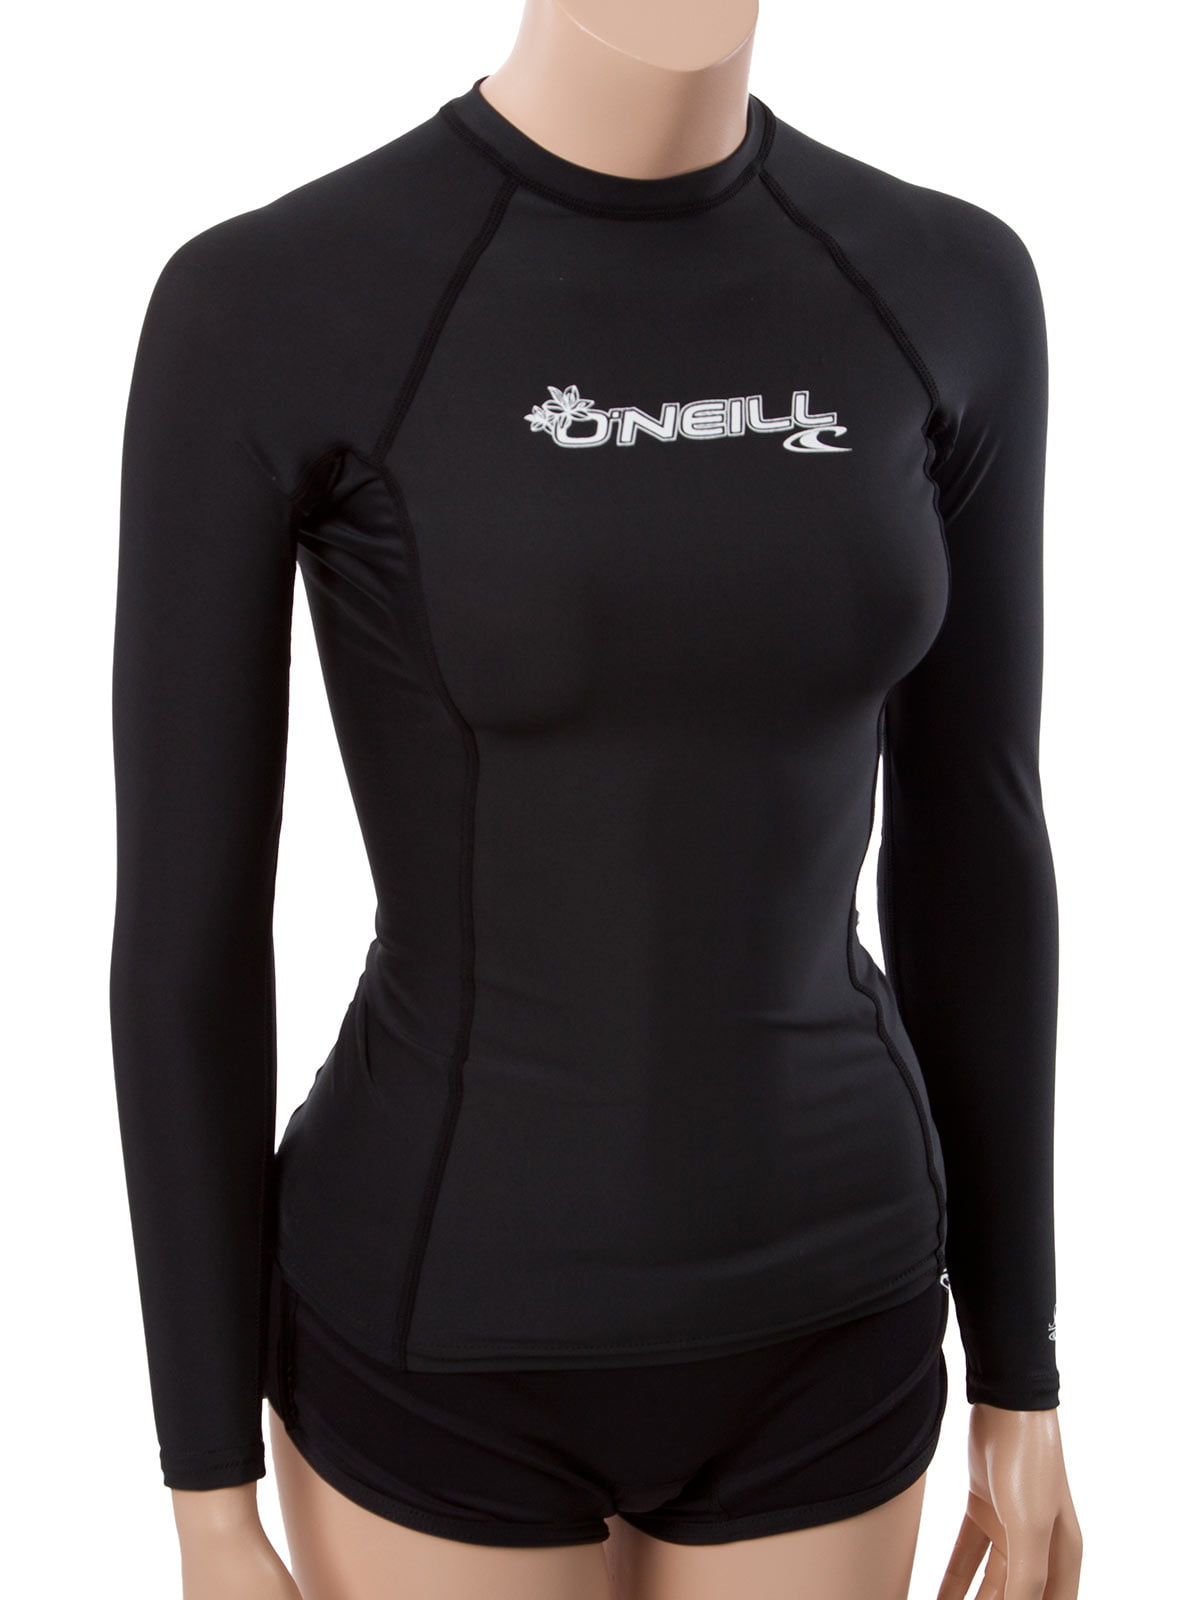 ONeill Wetsuits Womens Basic Skins Long Sleeve Rash Guard Oneill Uv Sun Protection-Black S Small